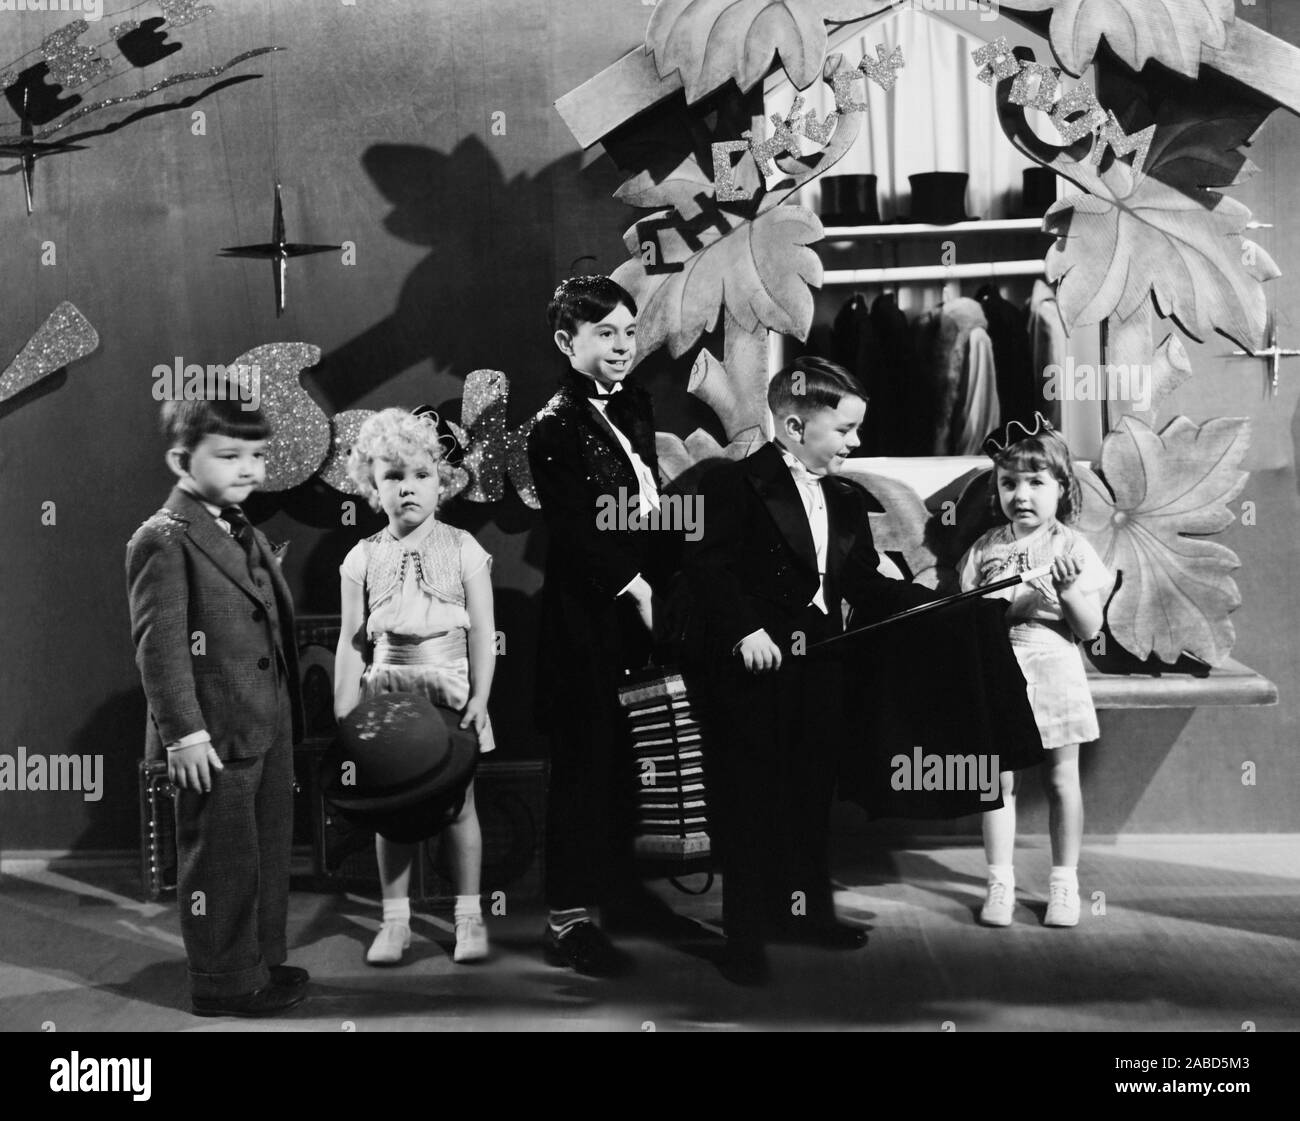 OUR GANG FOLLIES OF 1938, Eugene 'Porky' Lee (left), Carl 'Alfalfa' Switzer (accordian), Spanky McFarland (second from right), 1937 Stock Photo